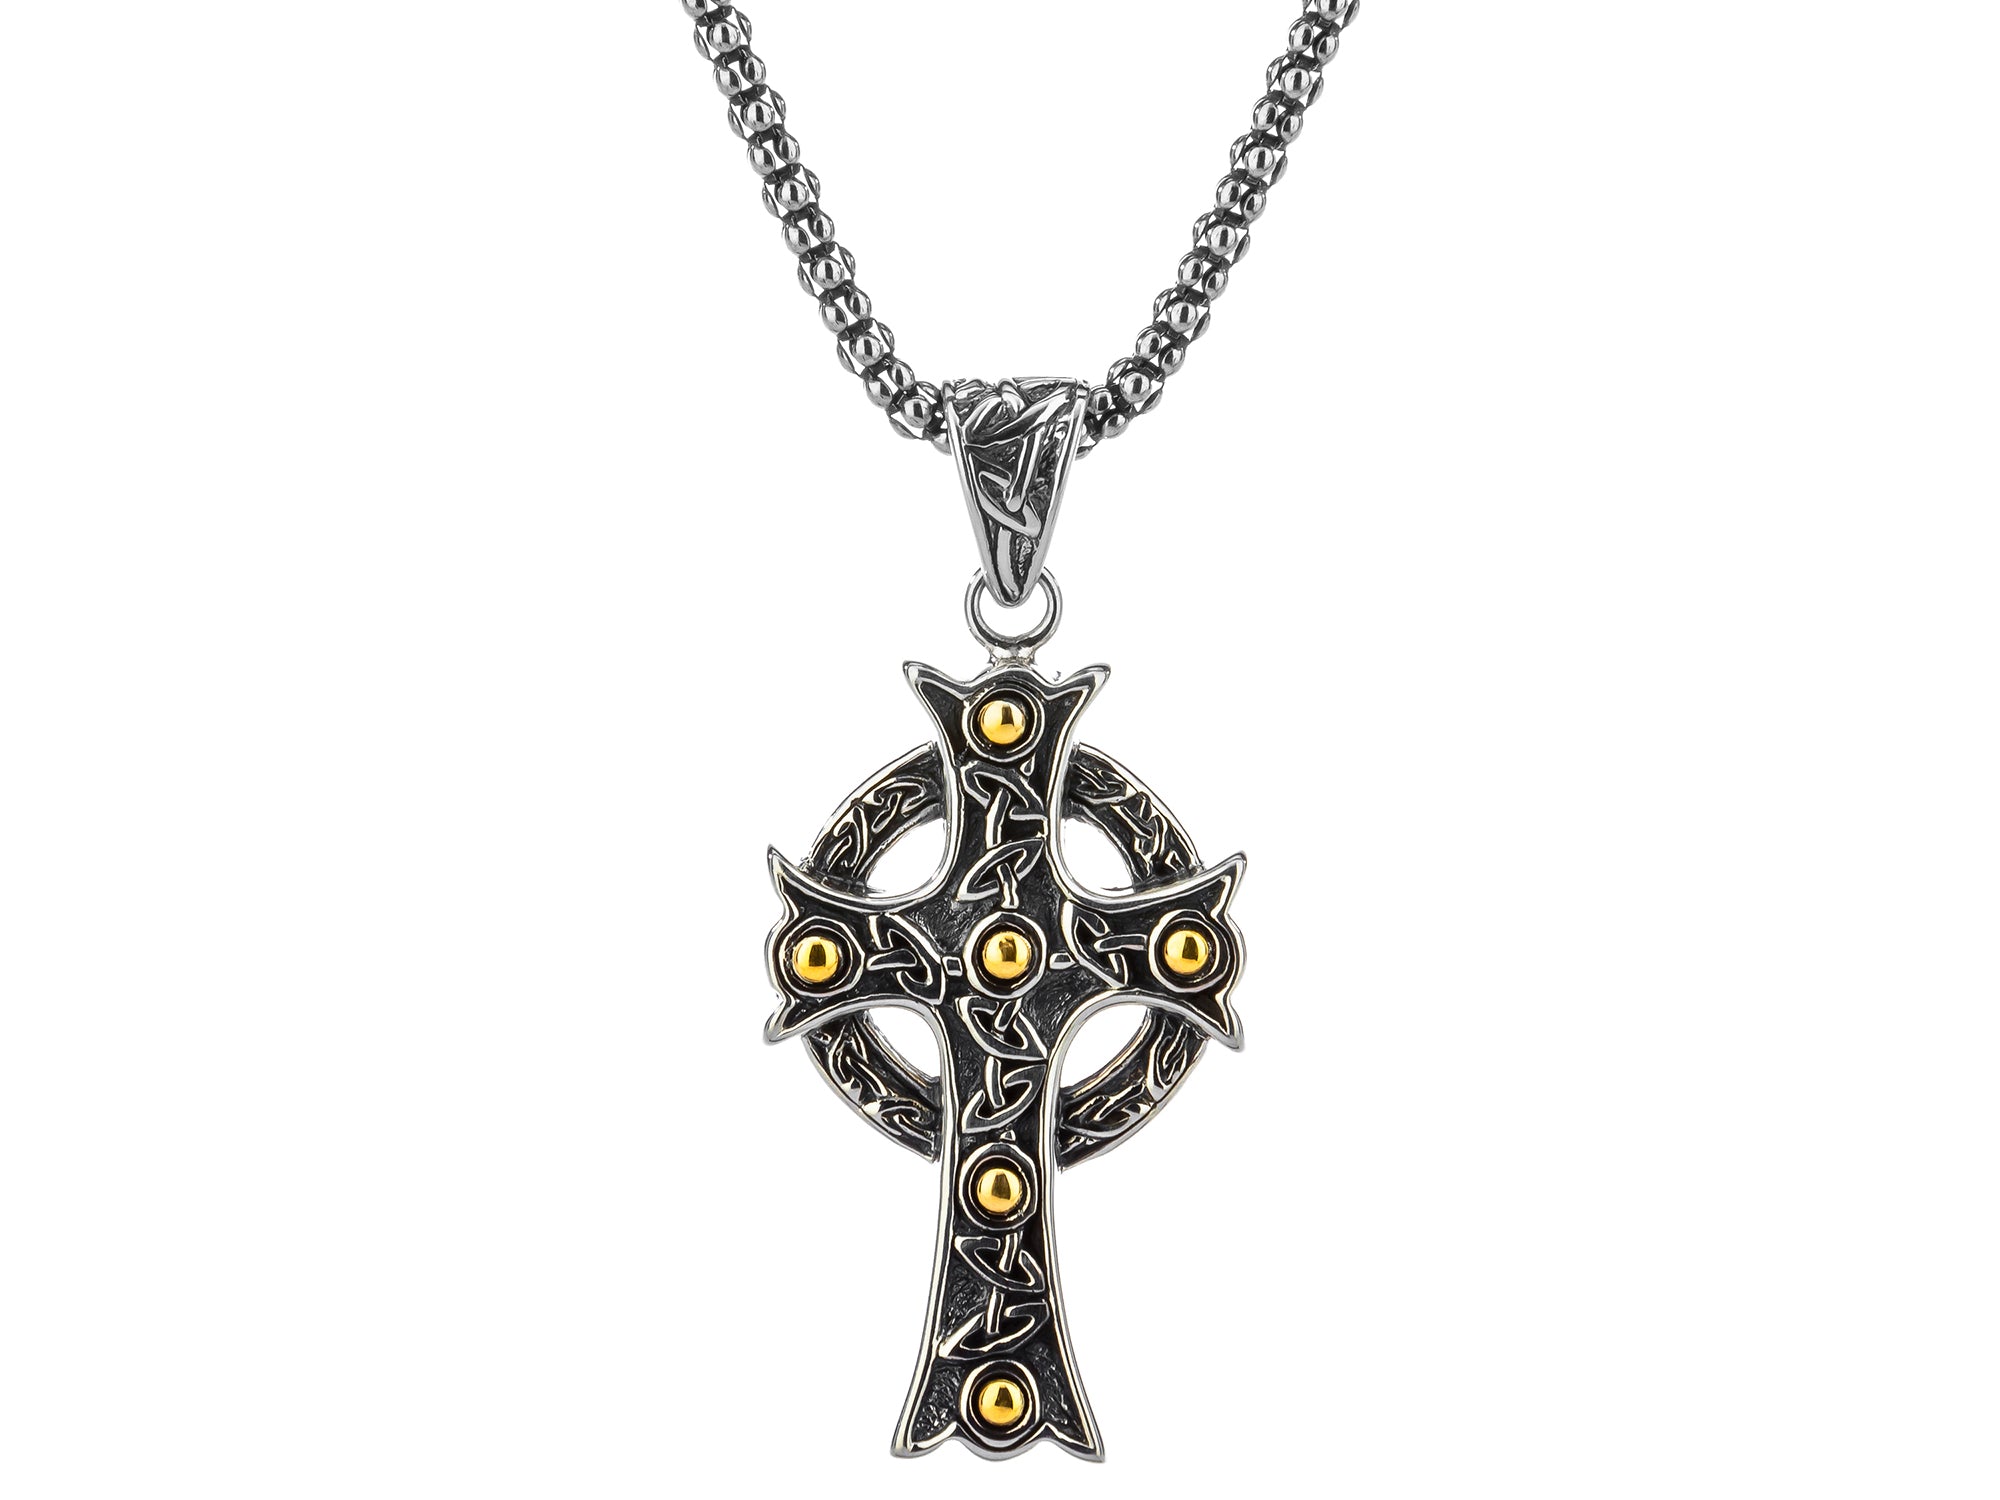 Ornate Cross Heart Necklace | Hot Topic